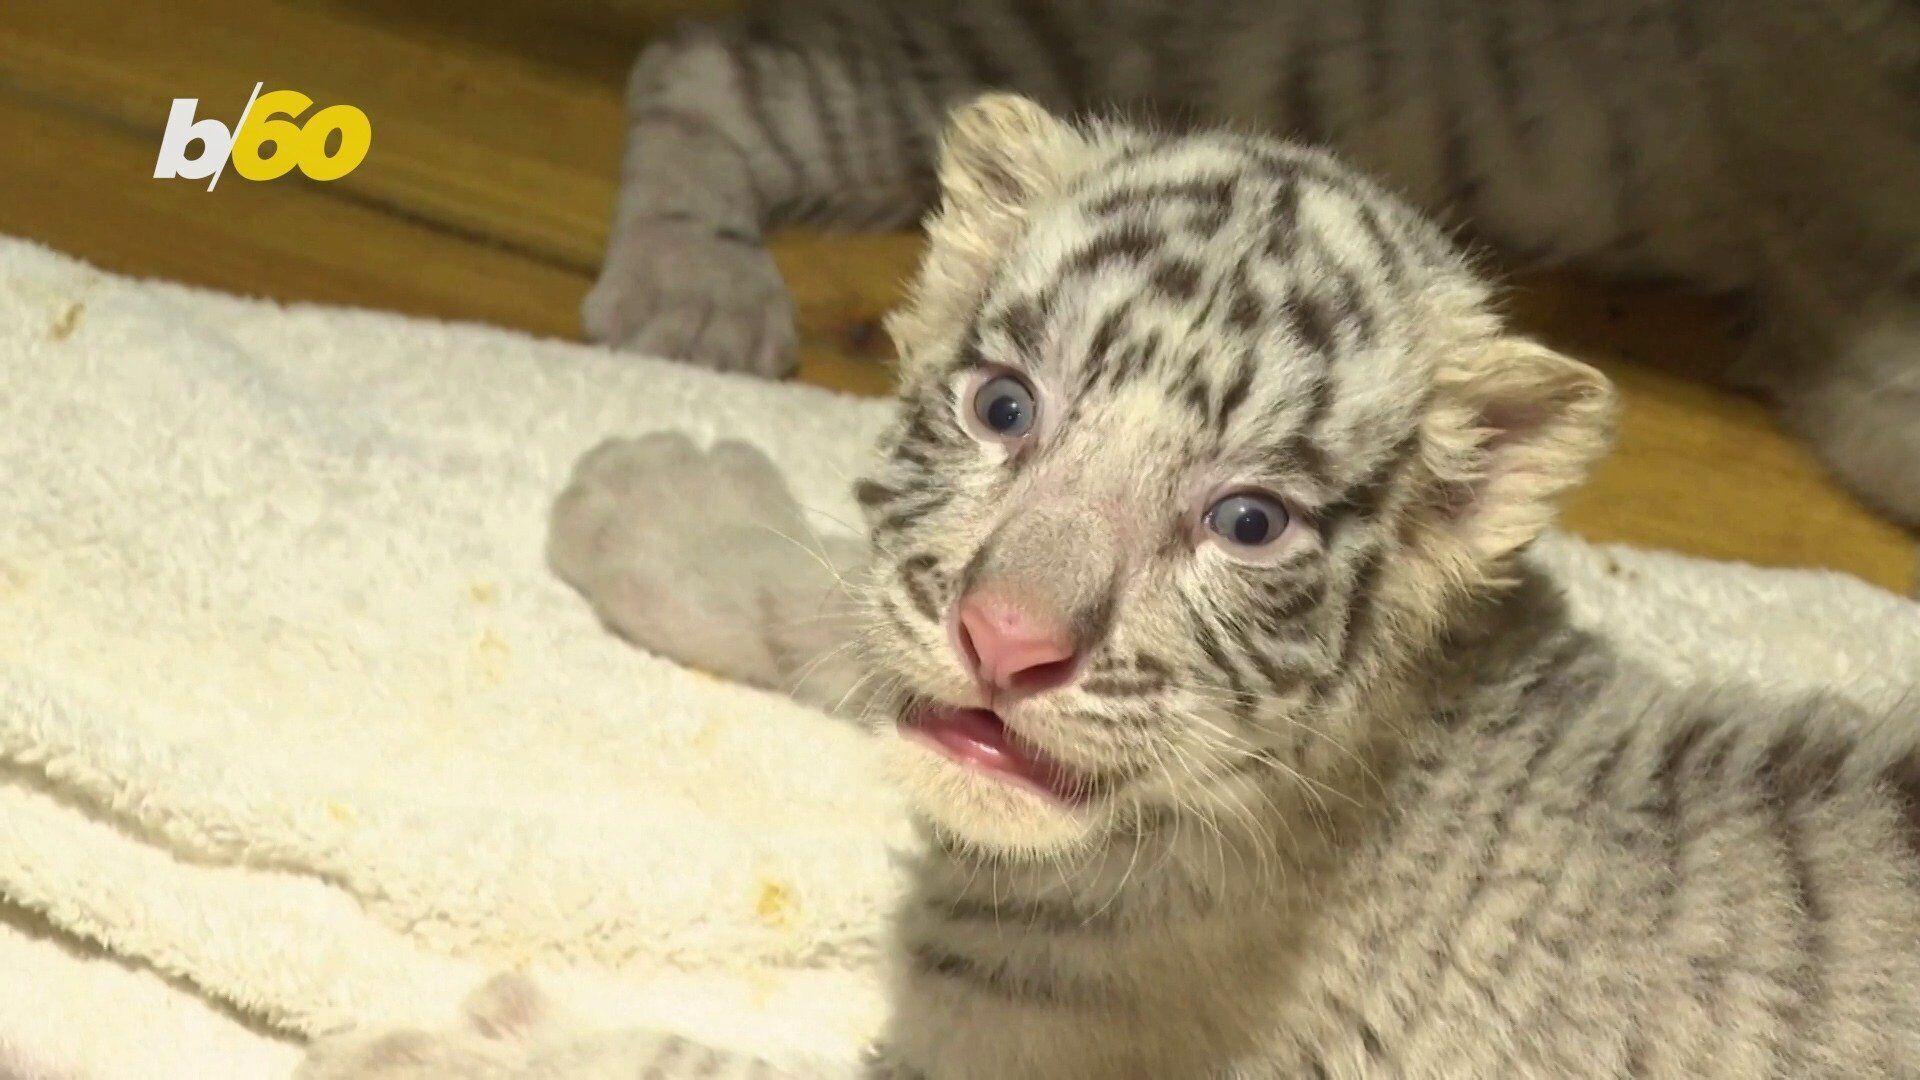 Extremely rare white Bengal tiger gives birth to sextuplets in China